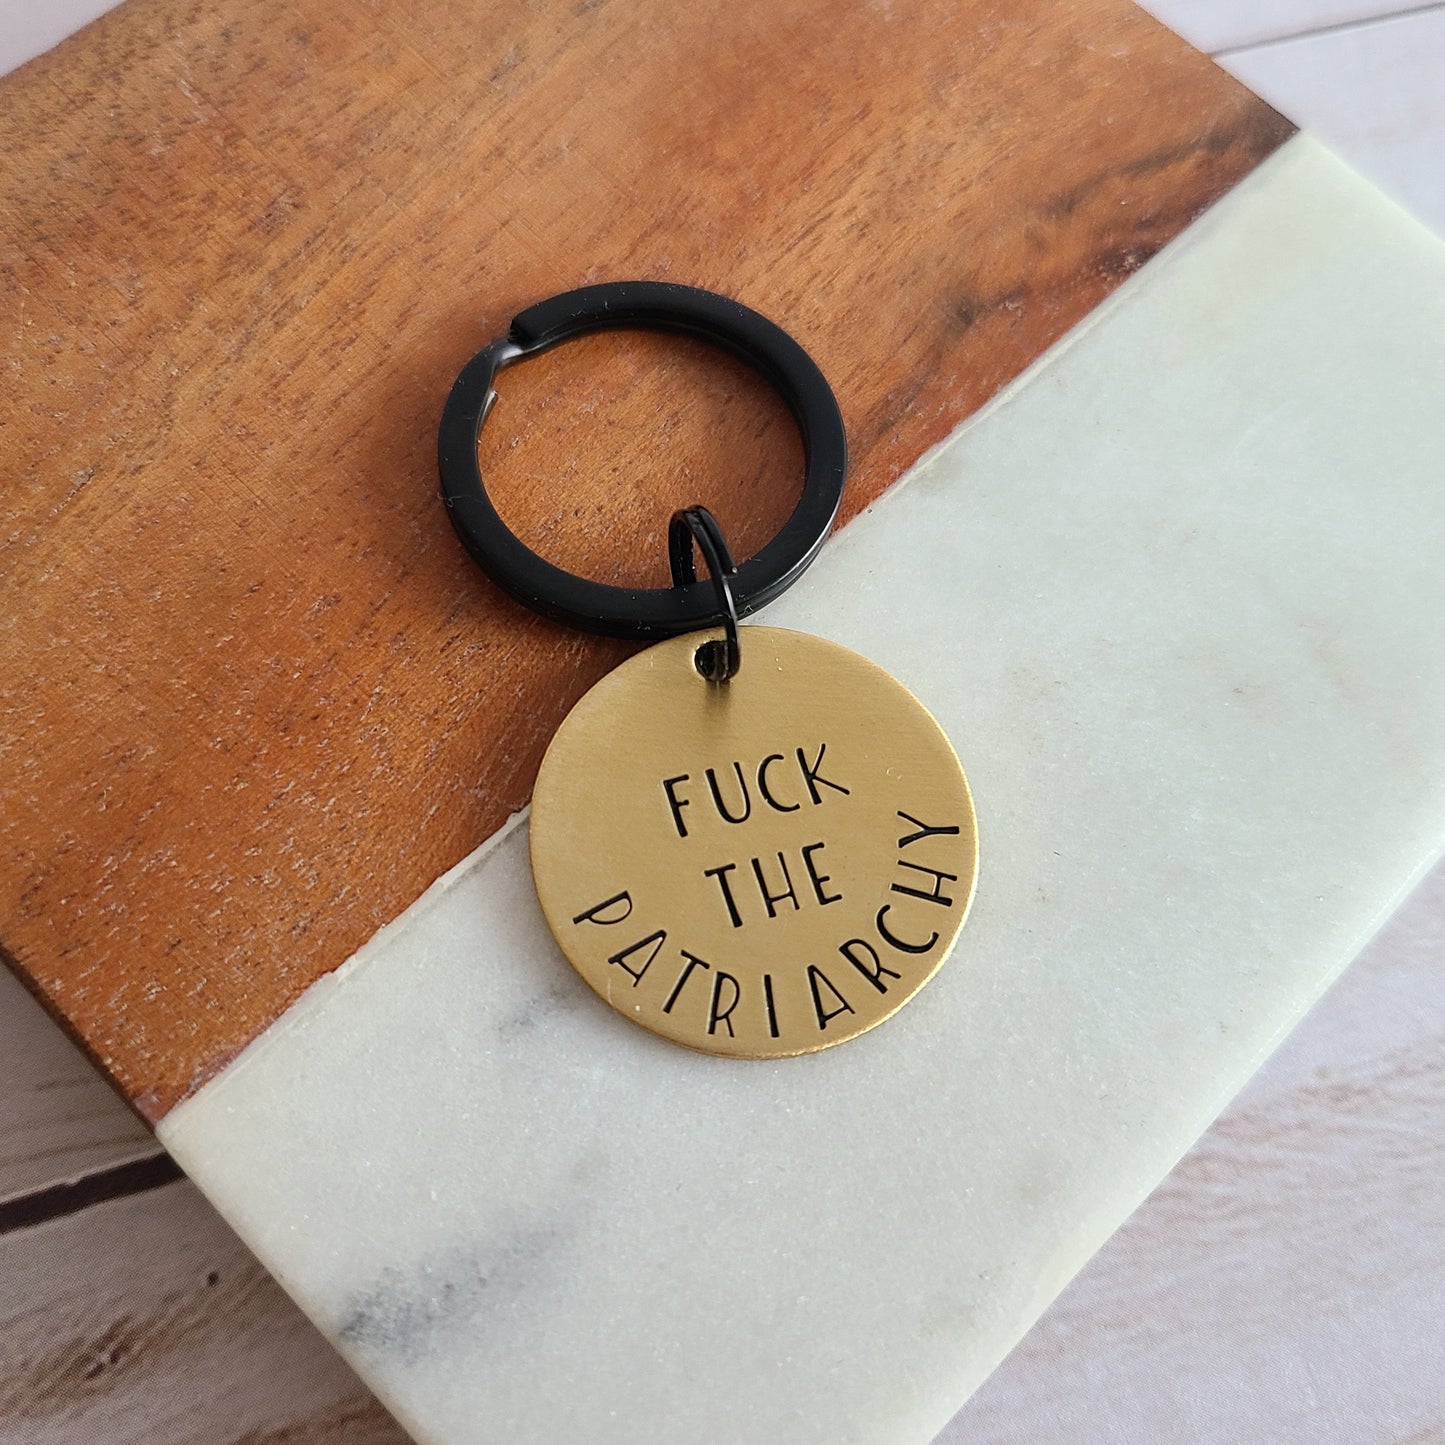 Fuck The Patriarchy Keychain, Brass Feminist Key Chain, Cute Keychains for Women, Liberal Bestie Birthday Gift, Feminism Womens Rights